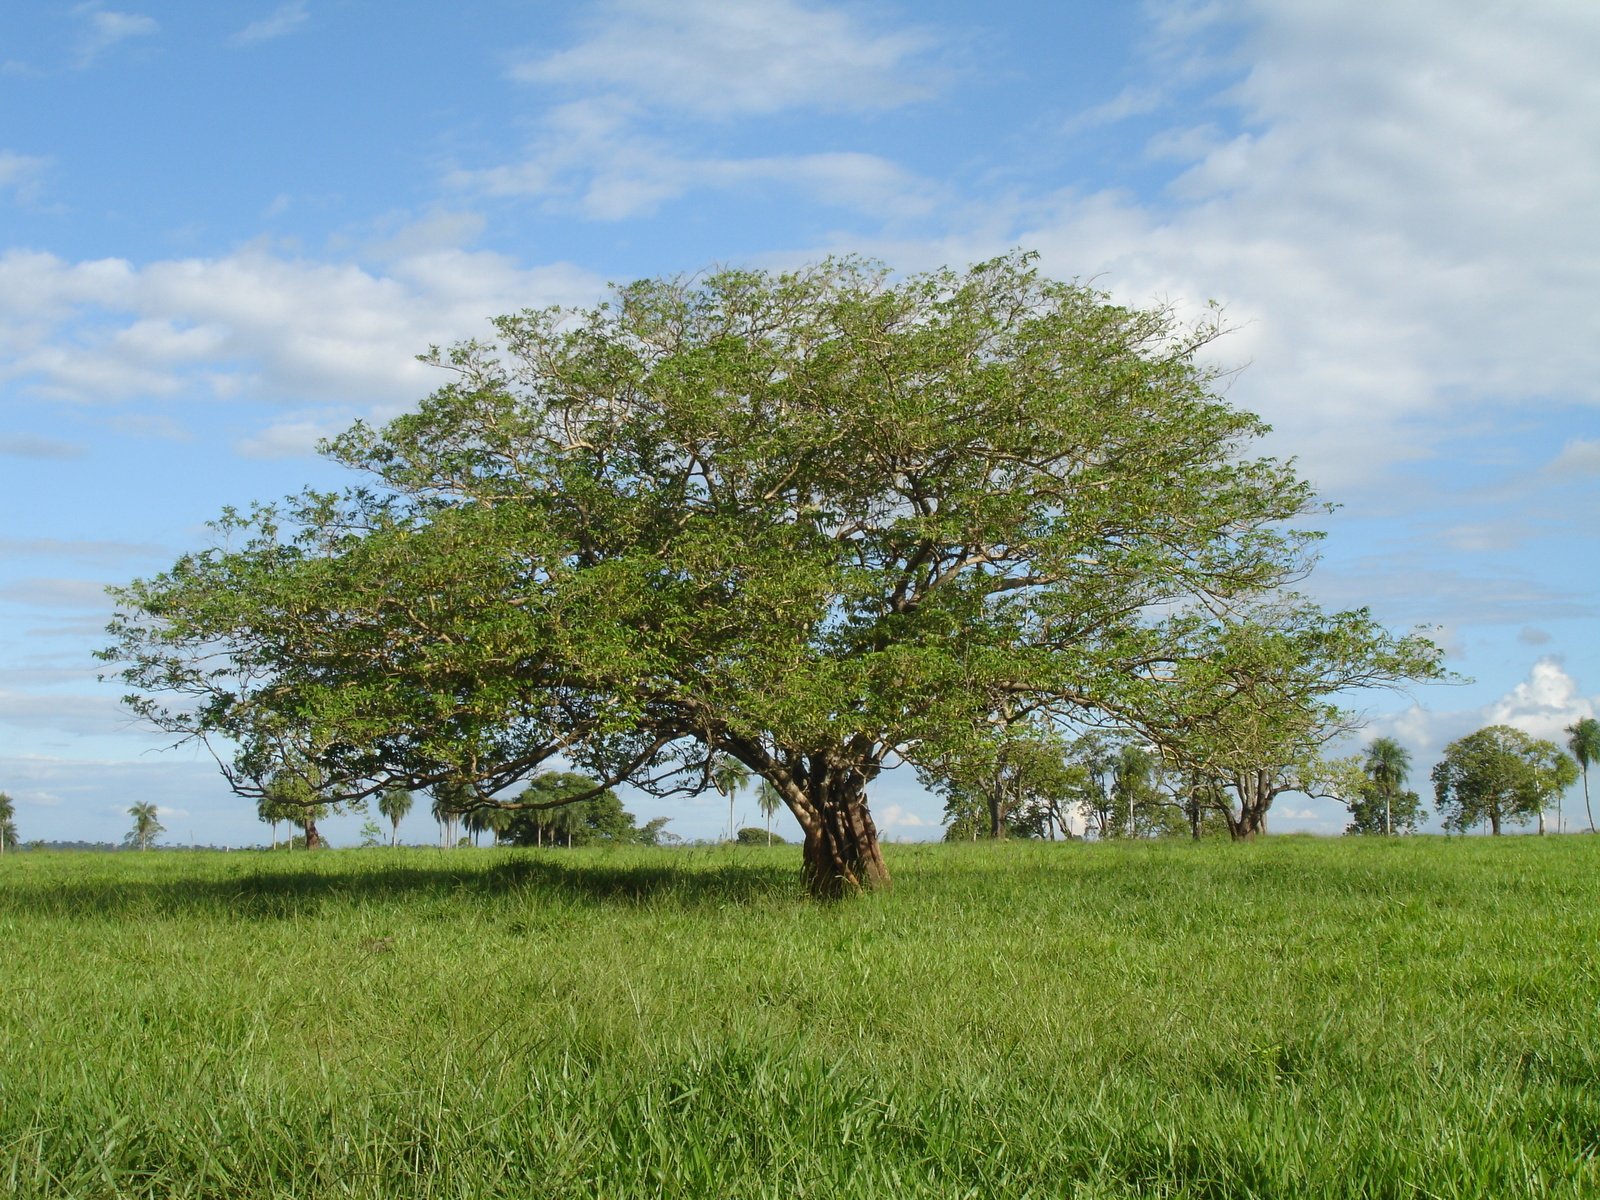 the large tree is by itself in a field